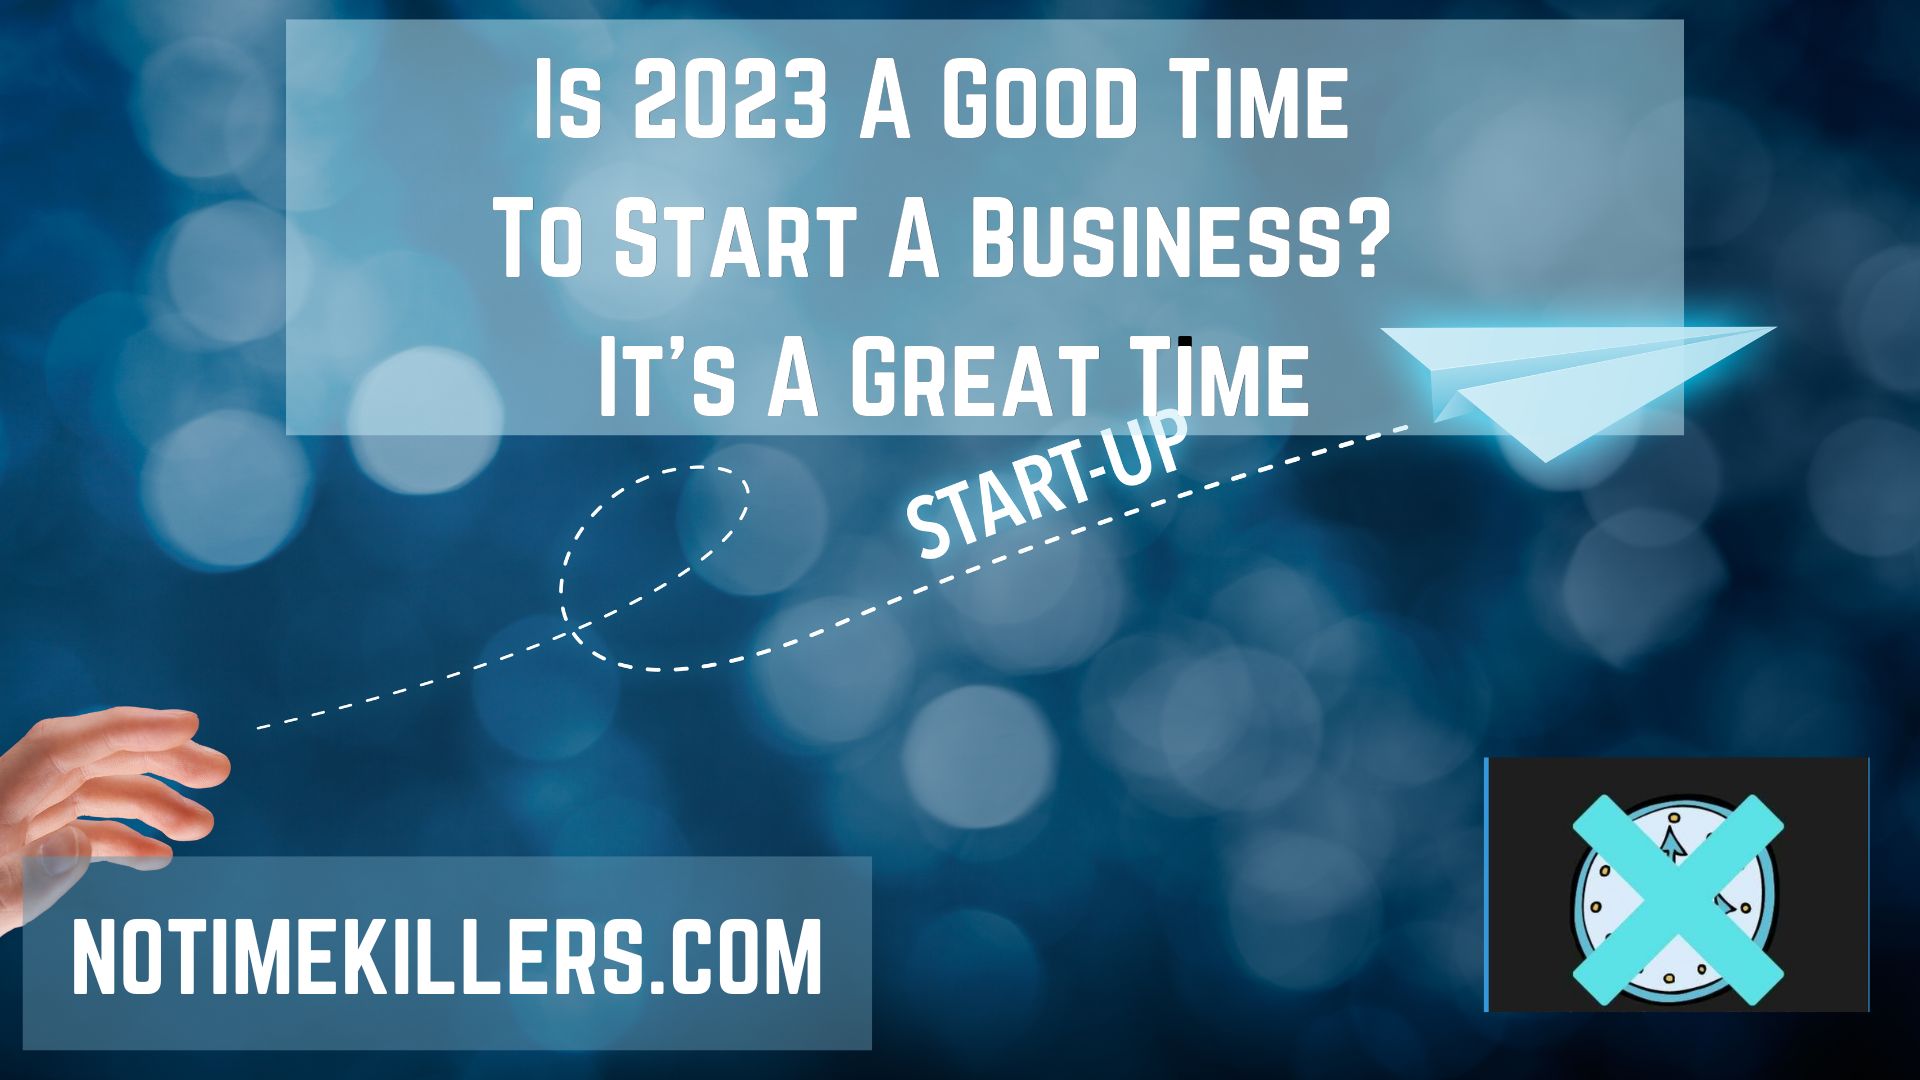 Is 2023 a good time to start a business? I will go over why 2023 is the year of "you" to finally start that business.